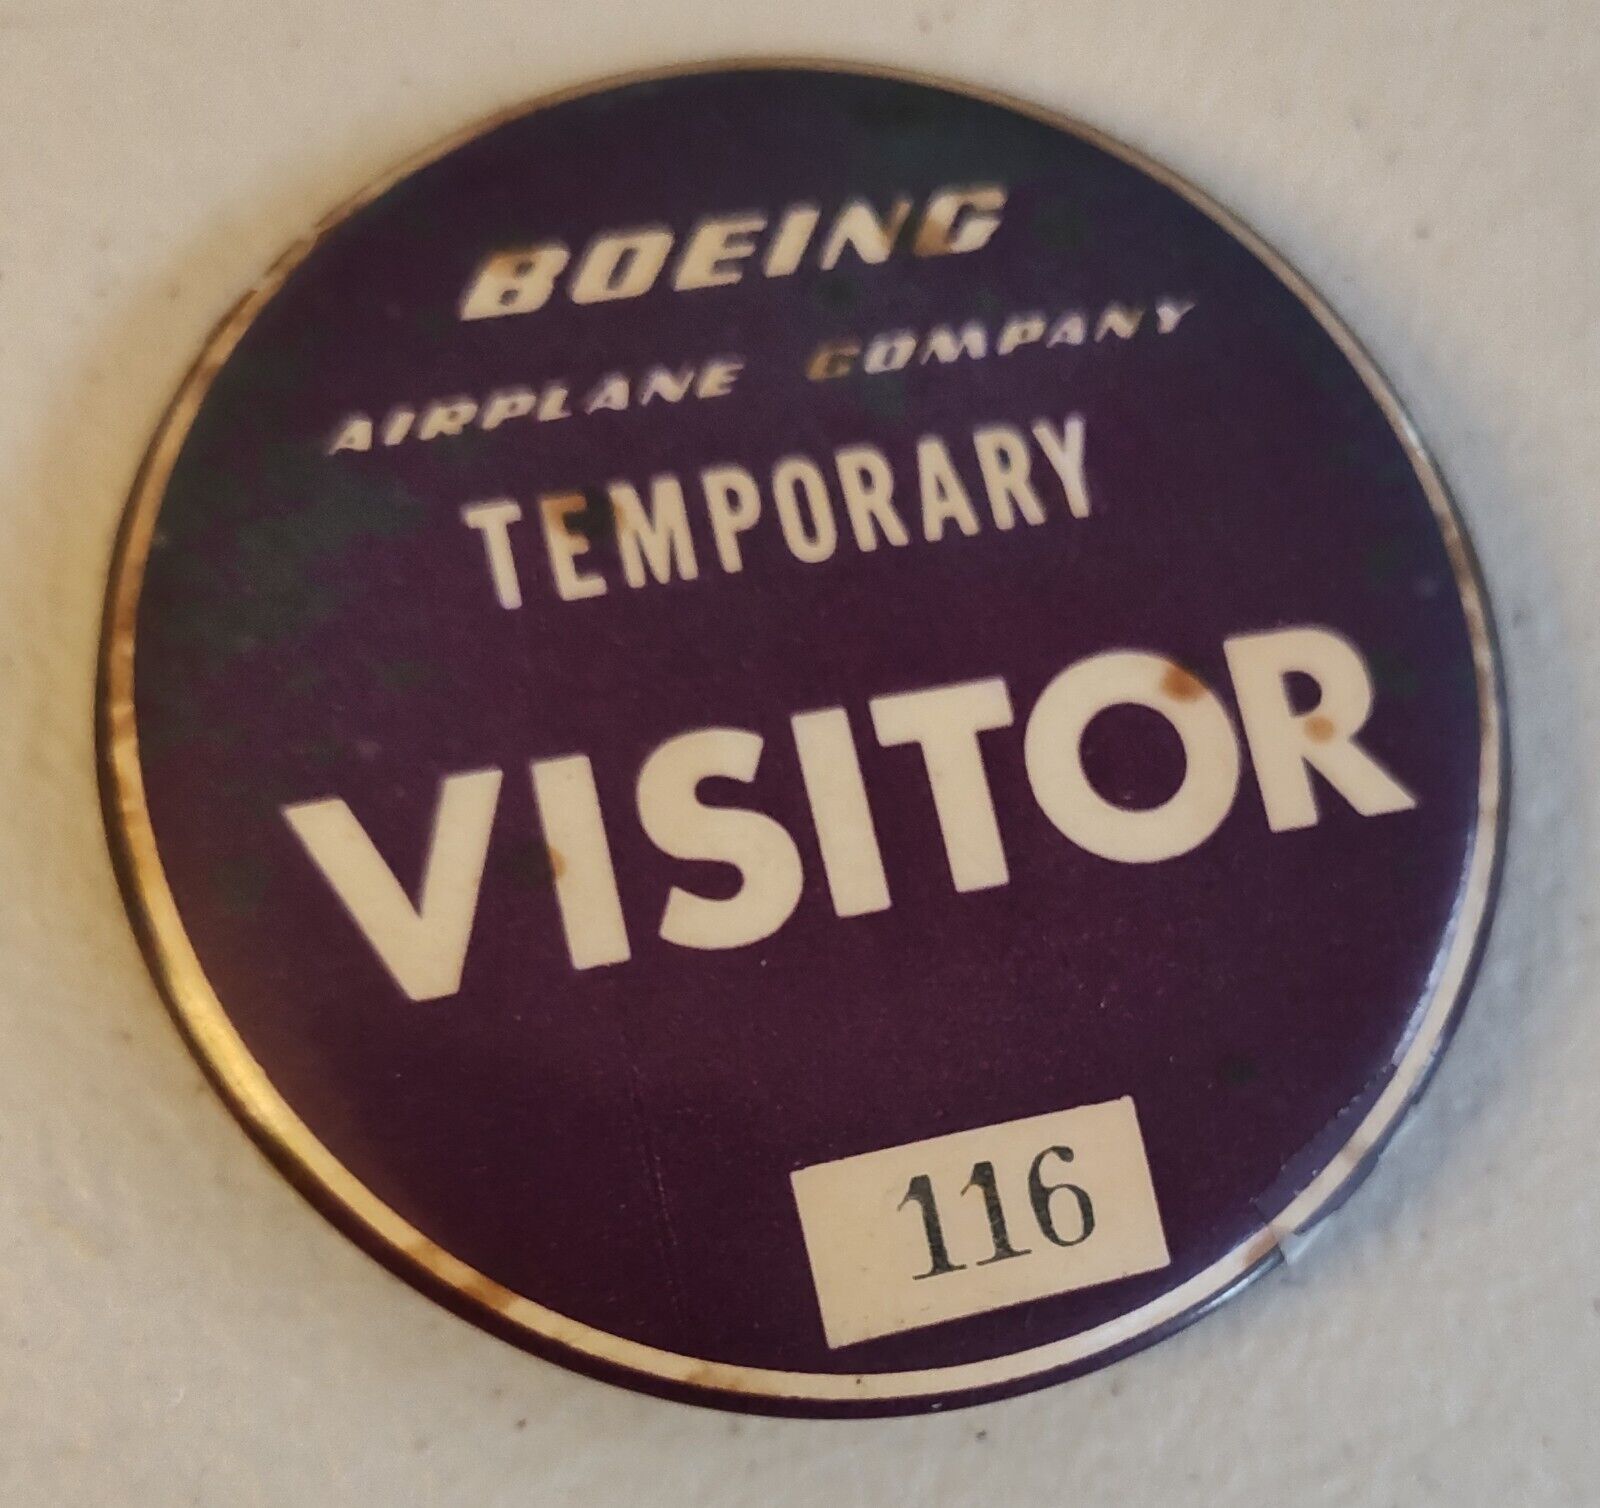 Vintage early Boeing Airplane Company - Seattle, Washington visitor ID badge